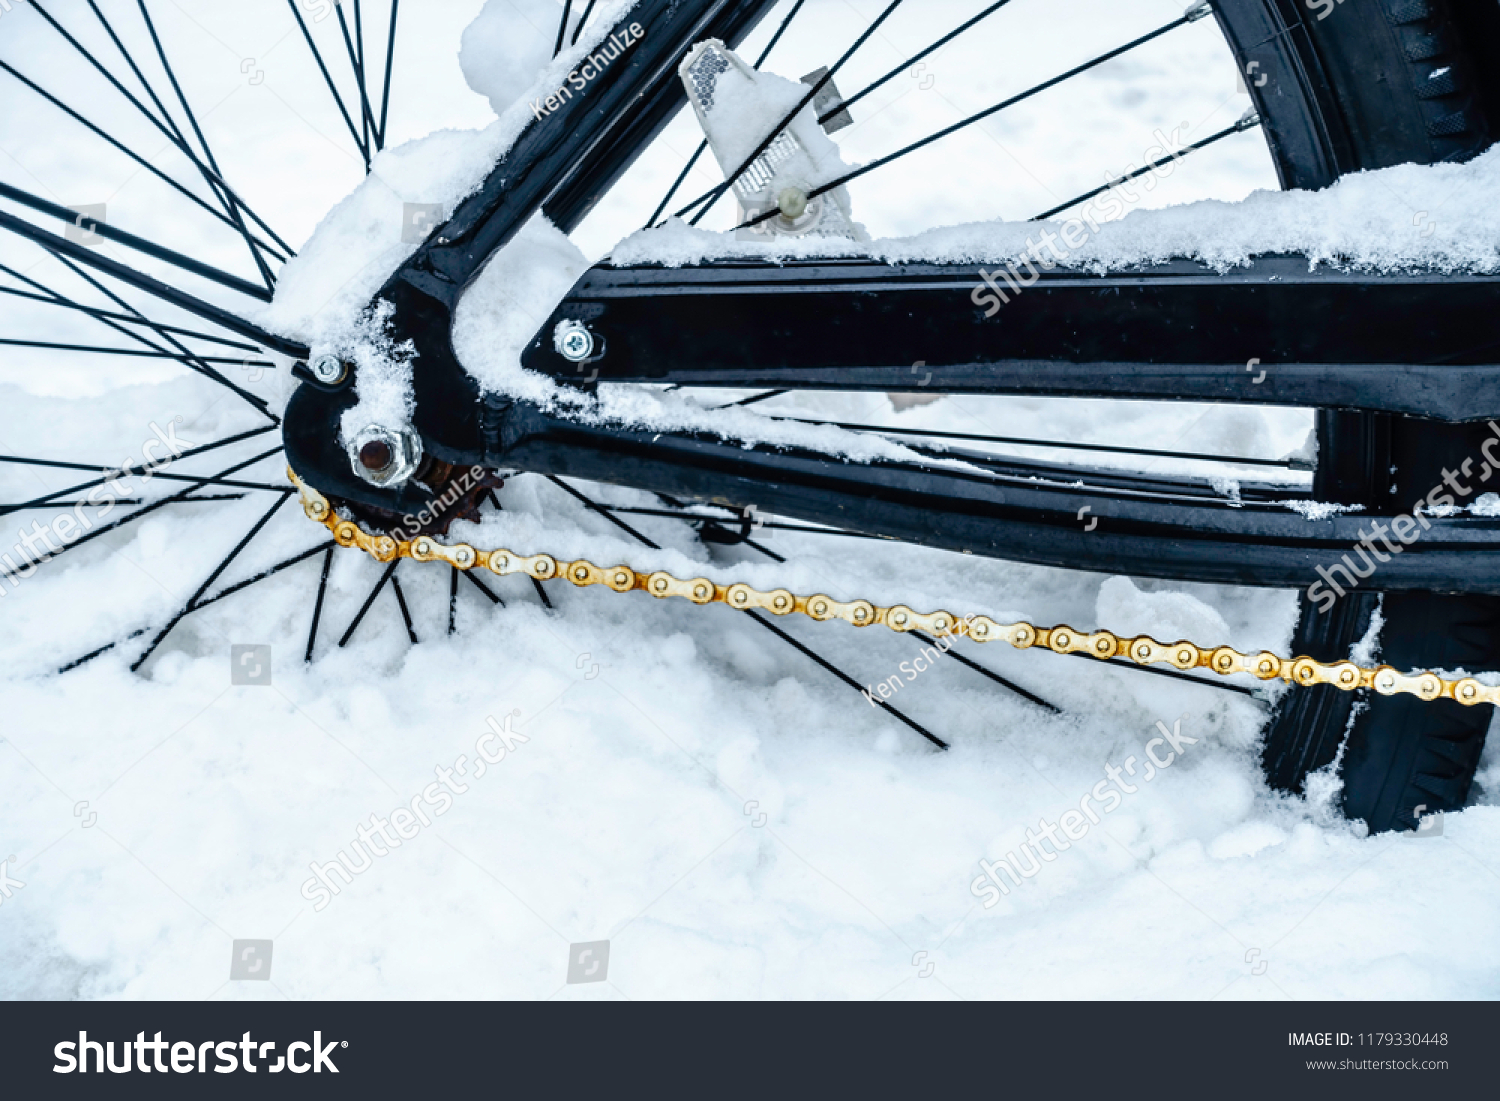 Winter at a glance: Closeup of rear wheel and rusting chain of bicycle stuck in snow, for themes of weather, transportation, adversity #1179330448